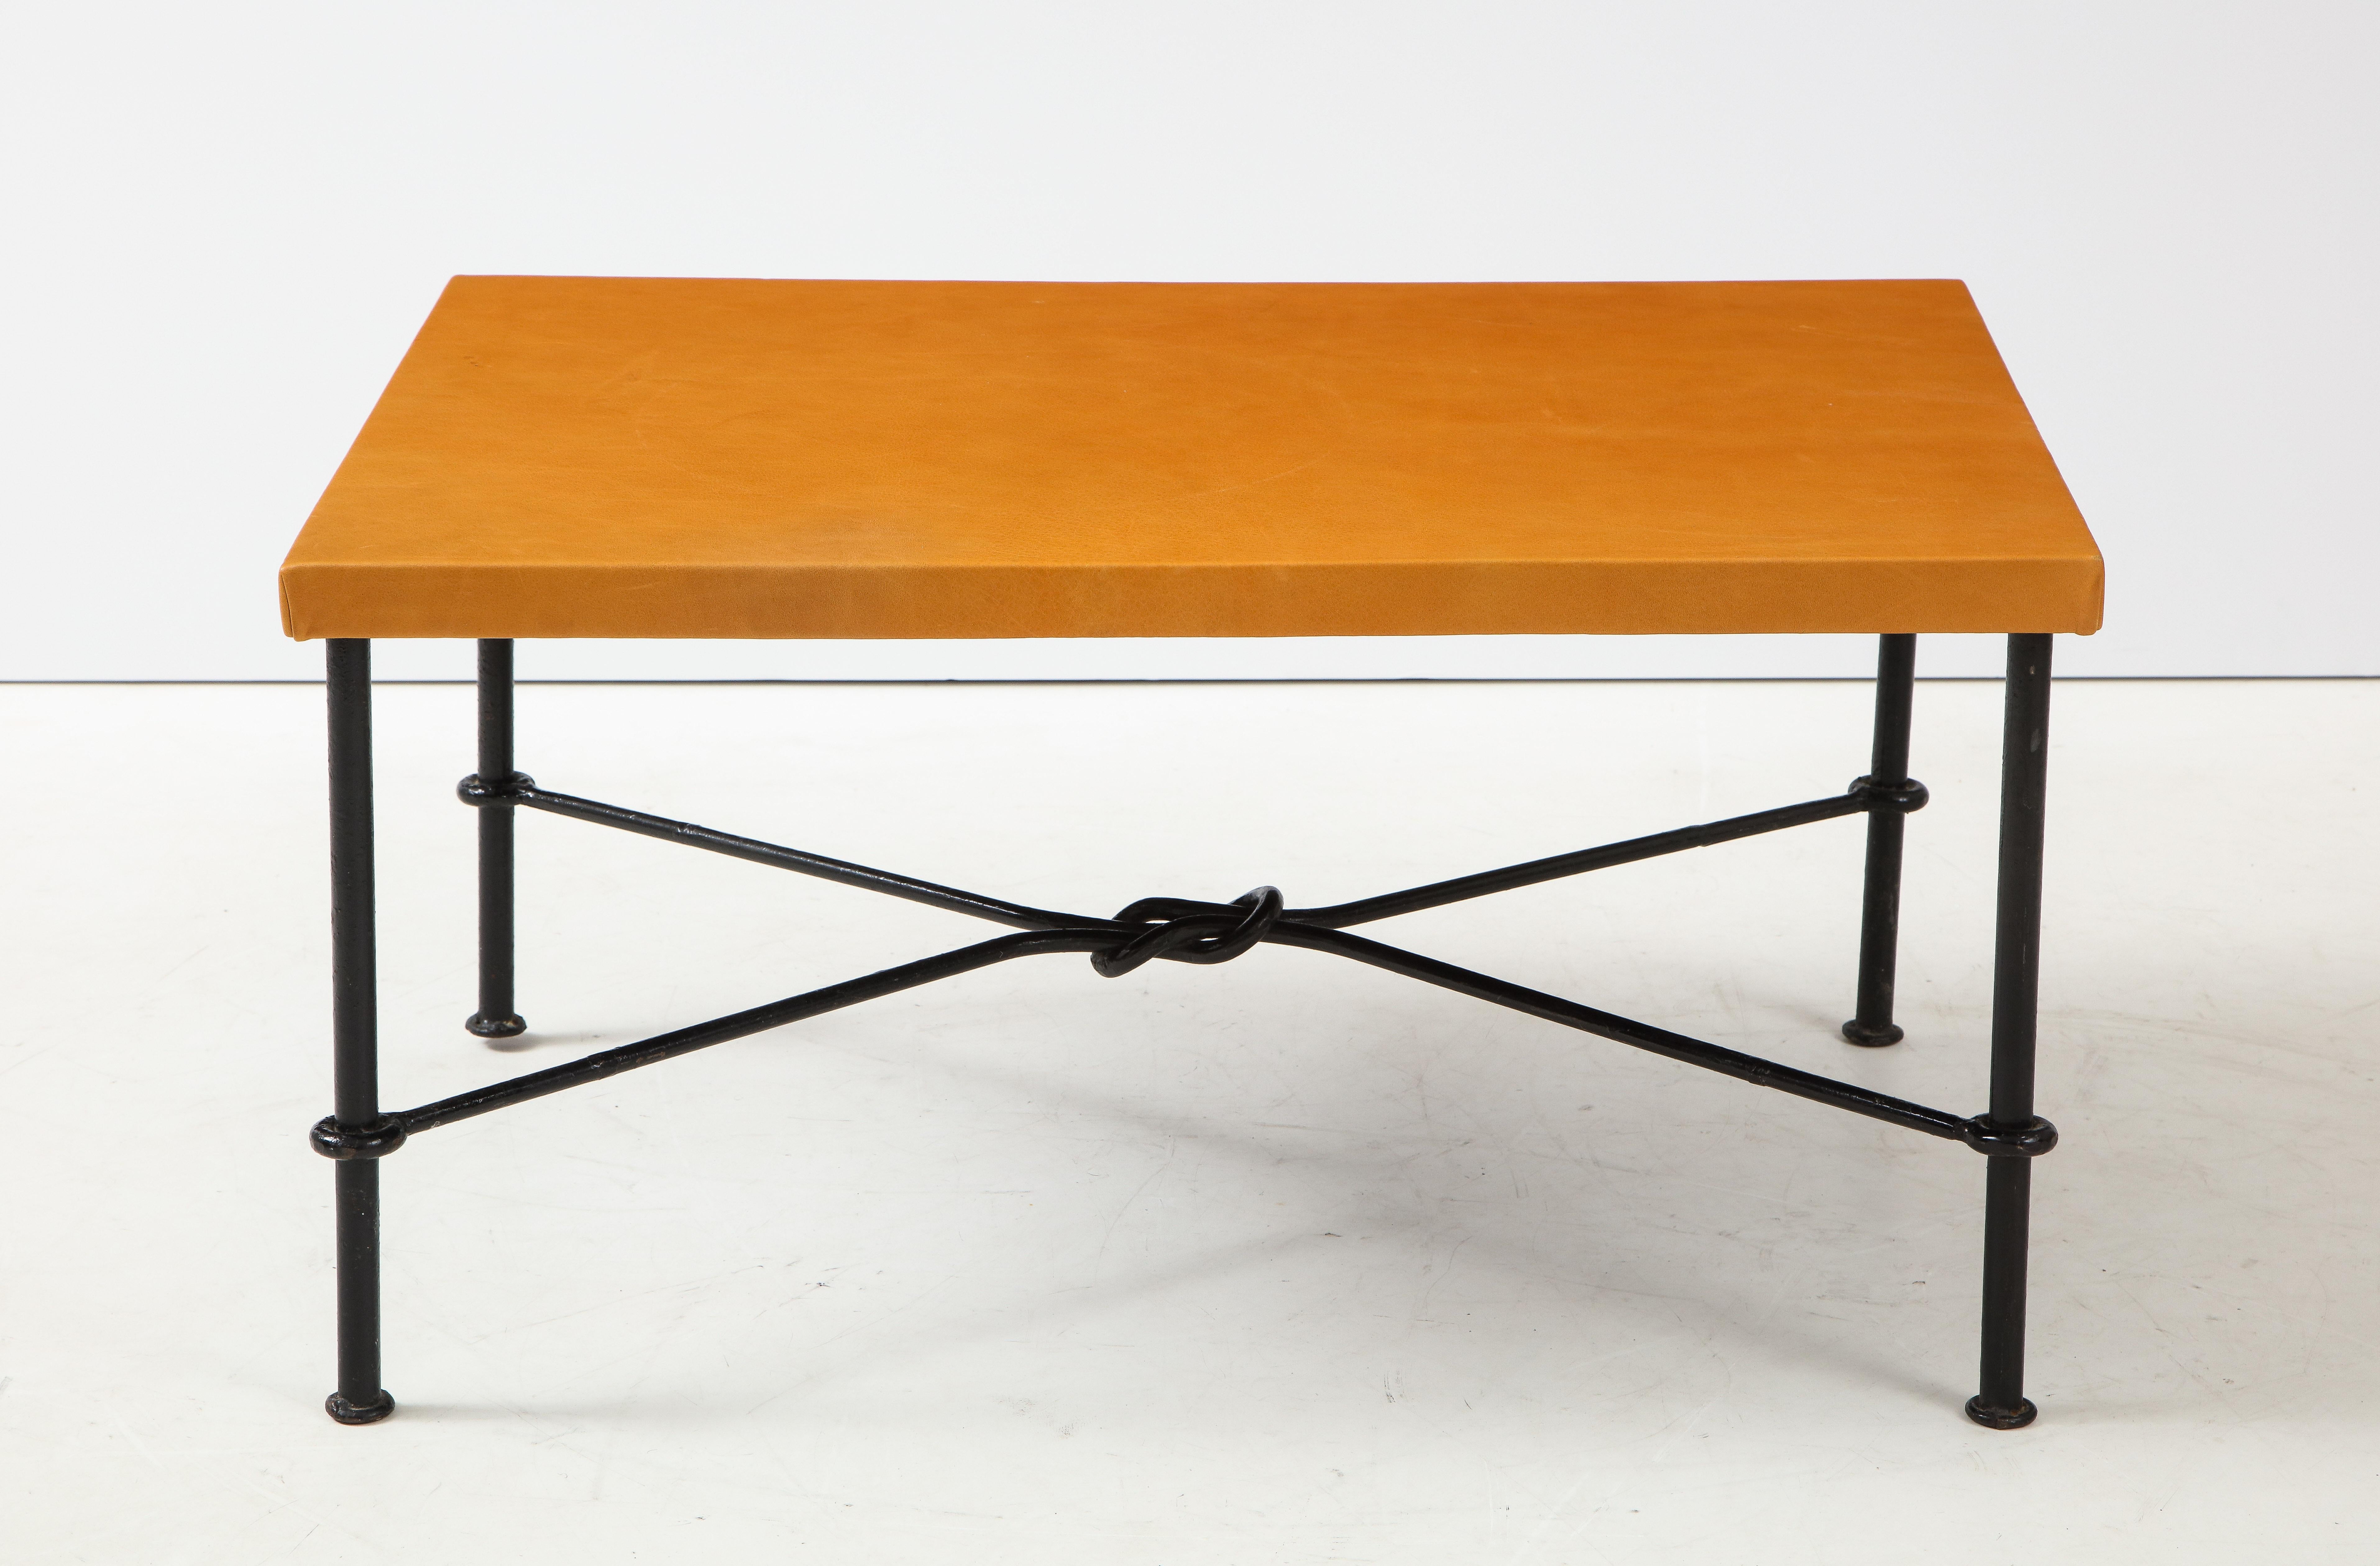 Modernist lacquered wrought iron and leather top side table; leather top is new
interesting iron knot metal work.